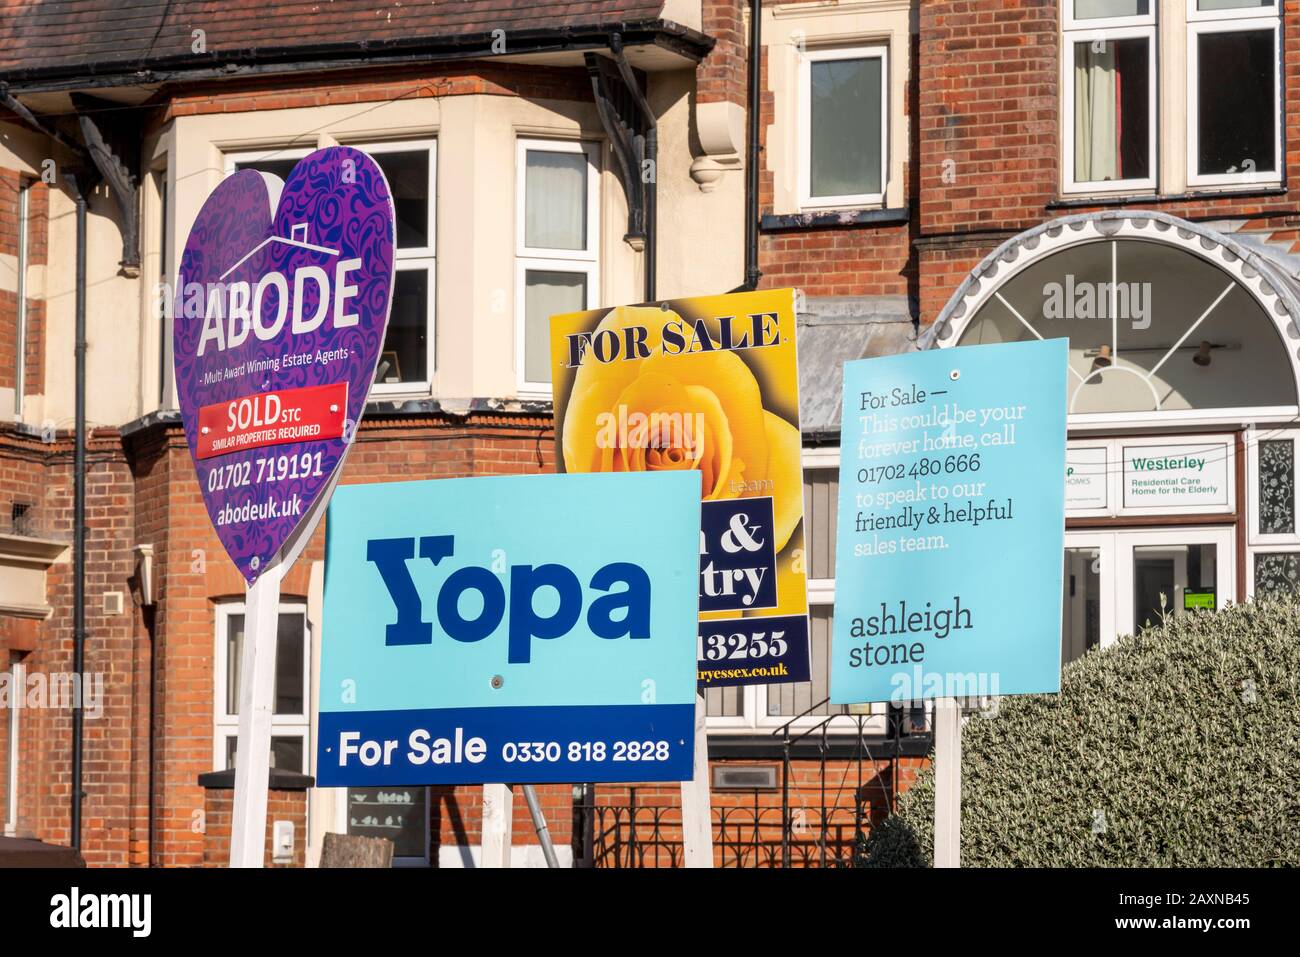 Yopa property for sale sign, among Abode, Town & Country and Ashleigh Stone signs. Online estate agent competing with traditional businesses Stock Photo